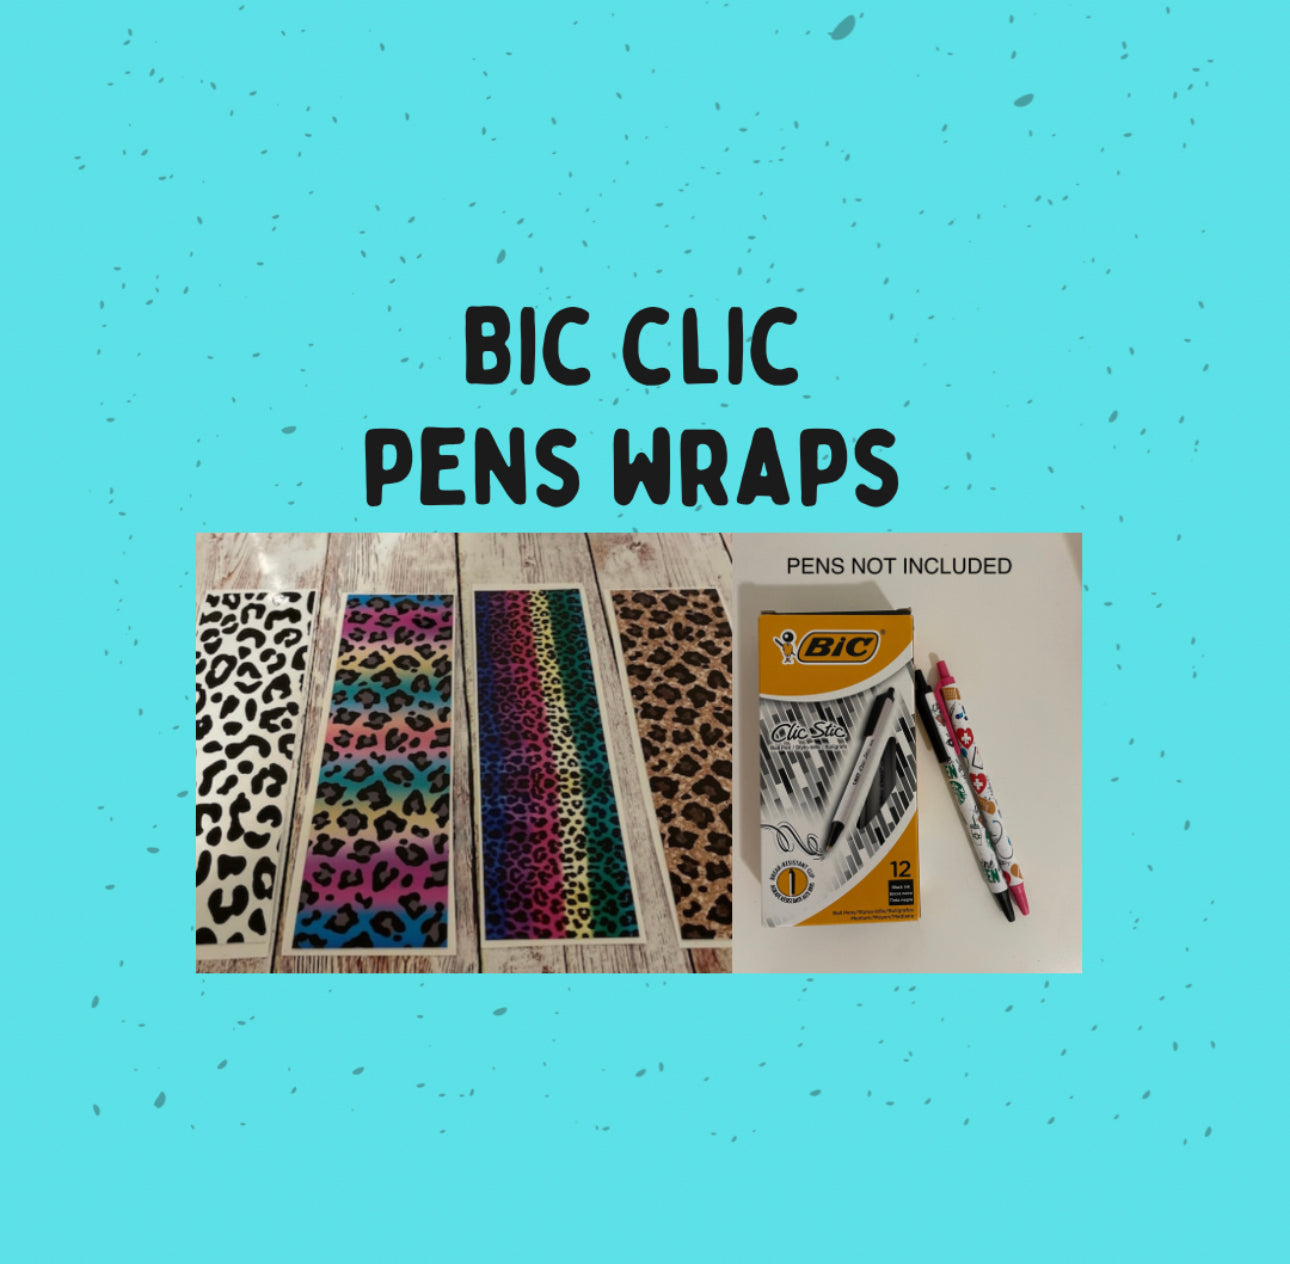 Pen Wrap For BIC Clic, EASTER, MOTHER’S DAY, ST PATRICK’S DAY For BIC CLIC RETRACTABLE PENS